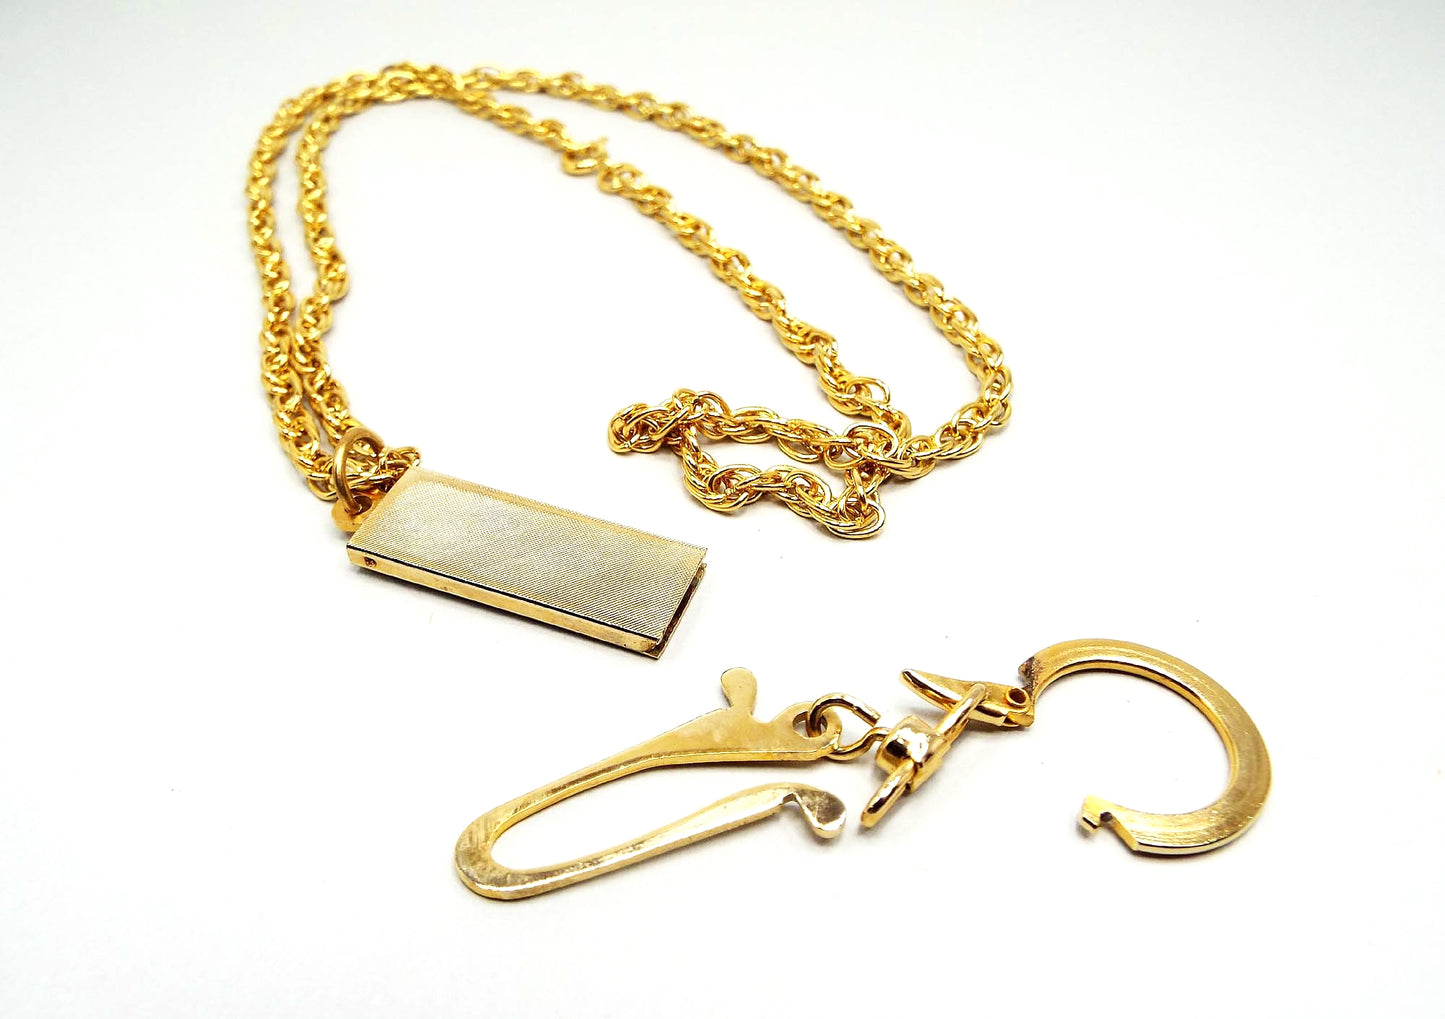 Vintage Keychain Lanyard with Removable Clip